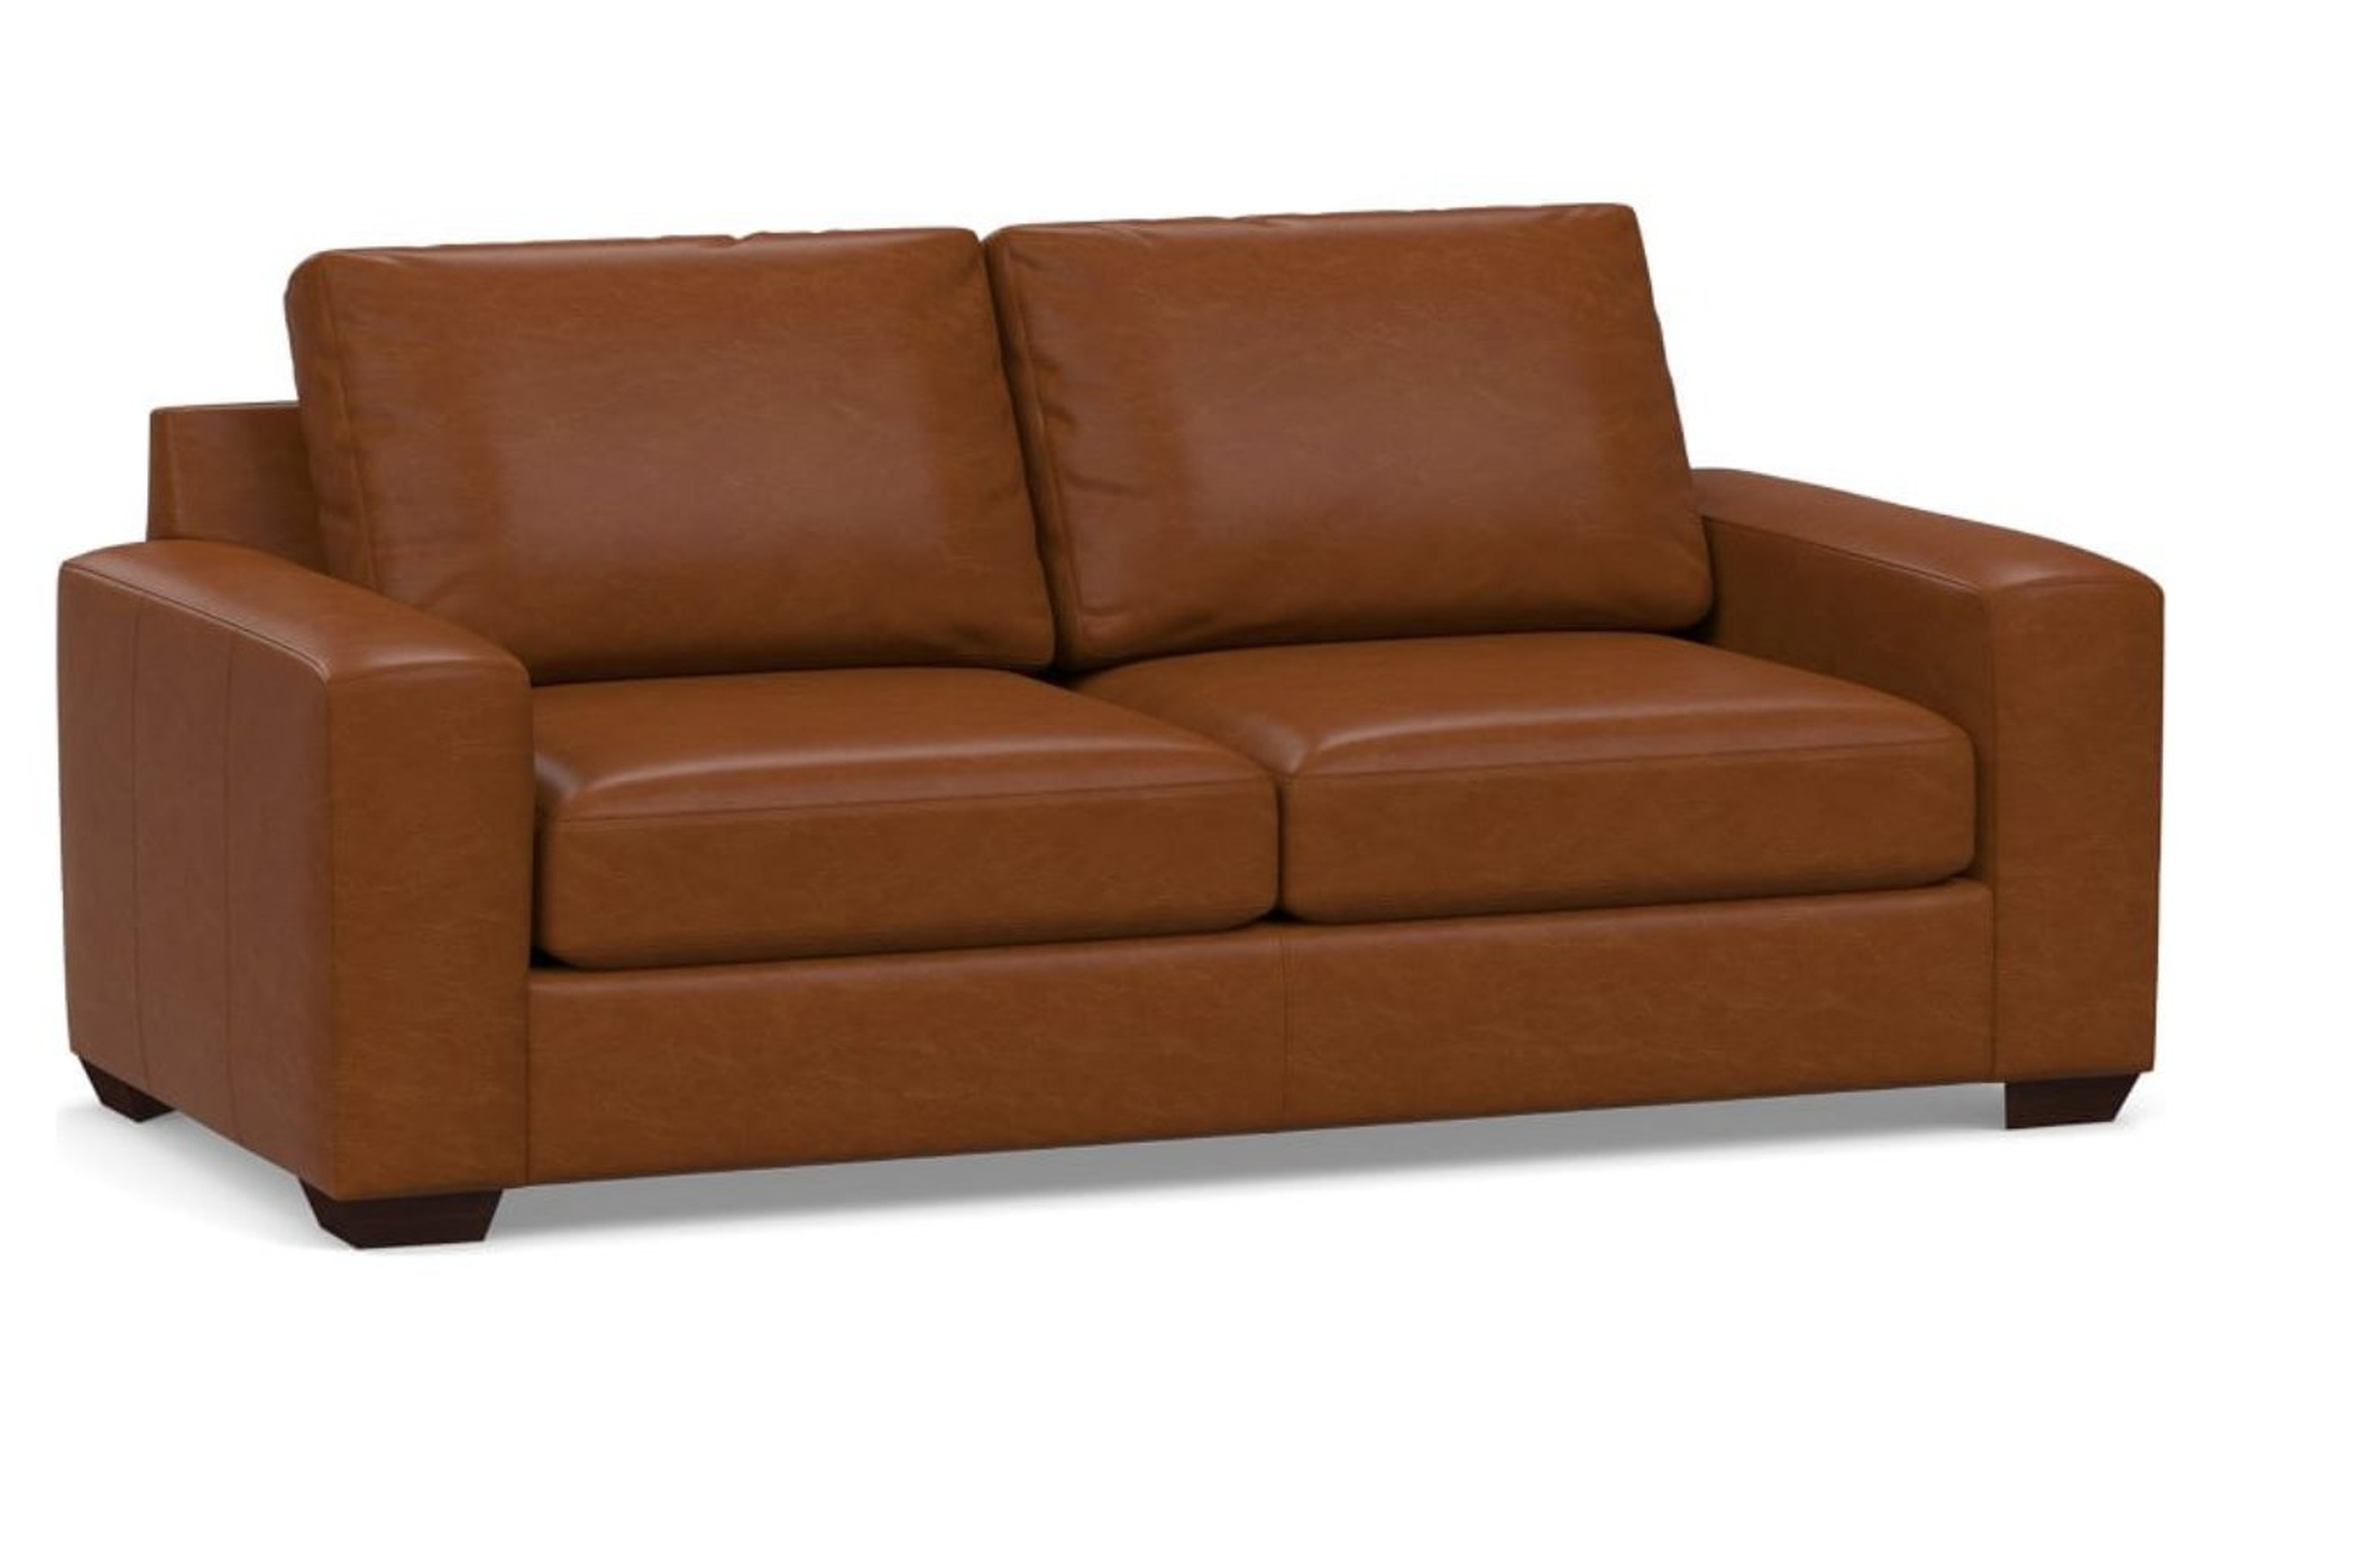 Big Sur Square Arm Leather Sofa 82", Down Blend Wrapped Cushions, Legacy Dark Caramel - Pottery Barn